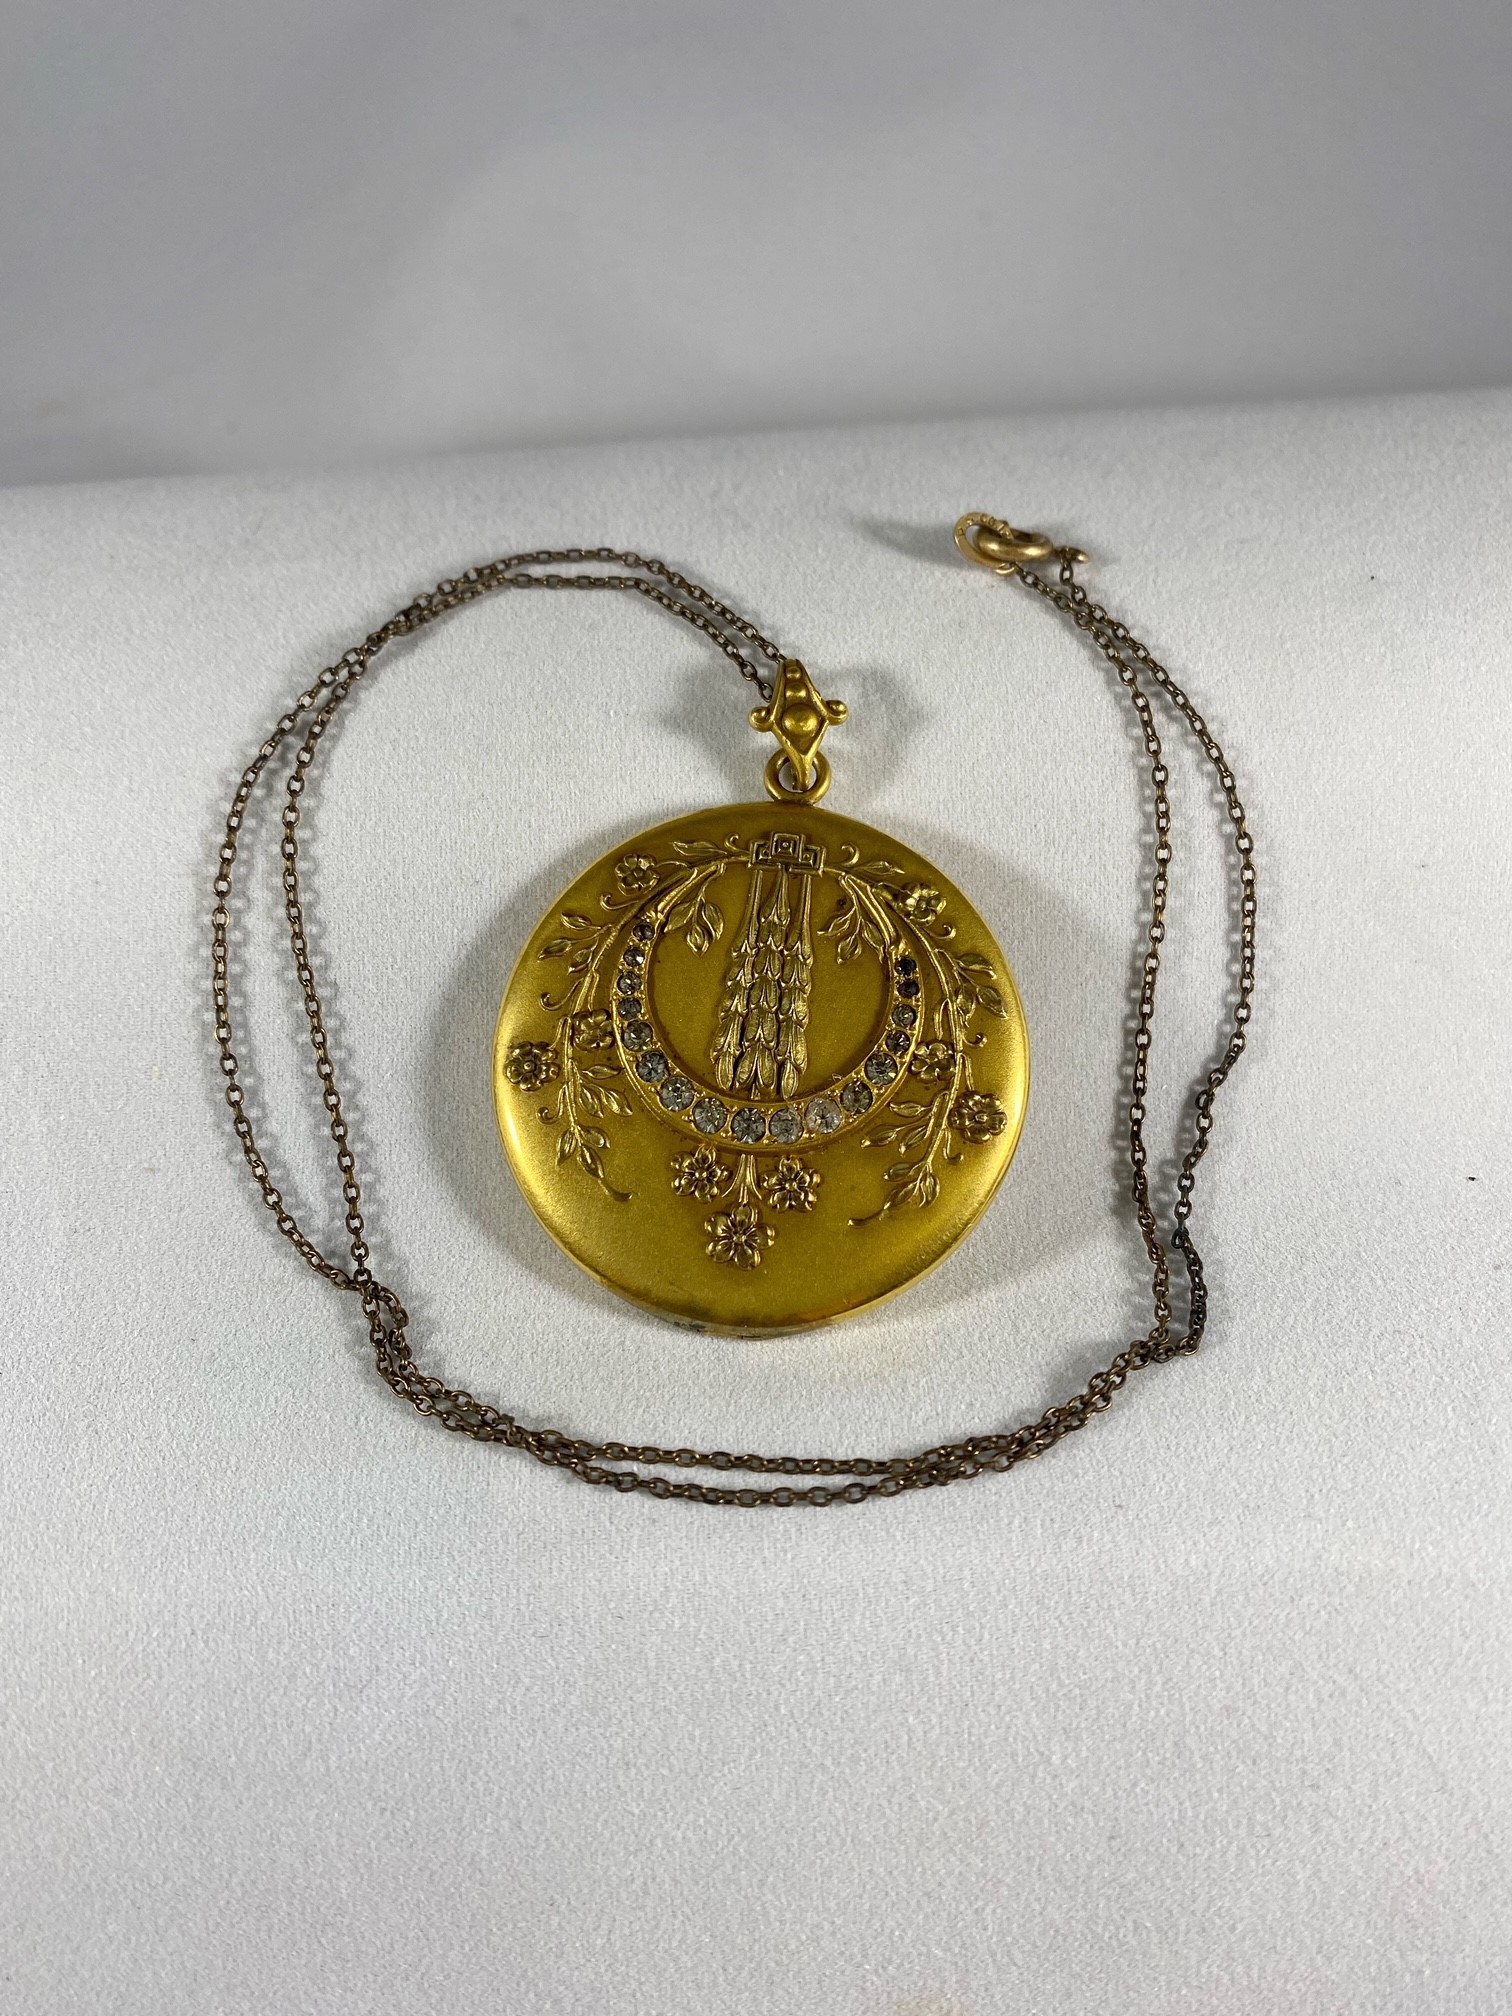 Lot 1061: Gold Colored Necklace with Locket with Clear Stones